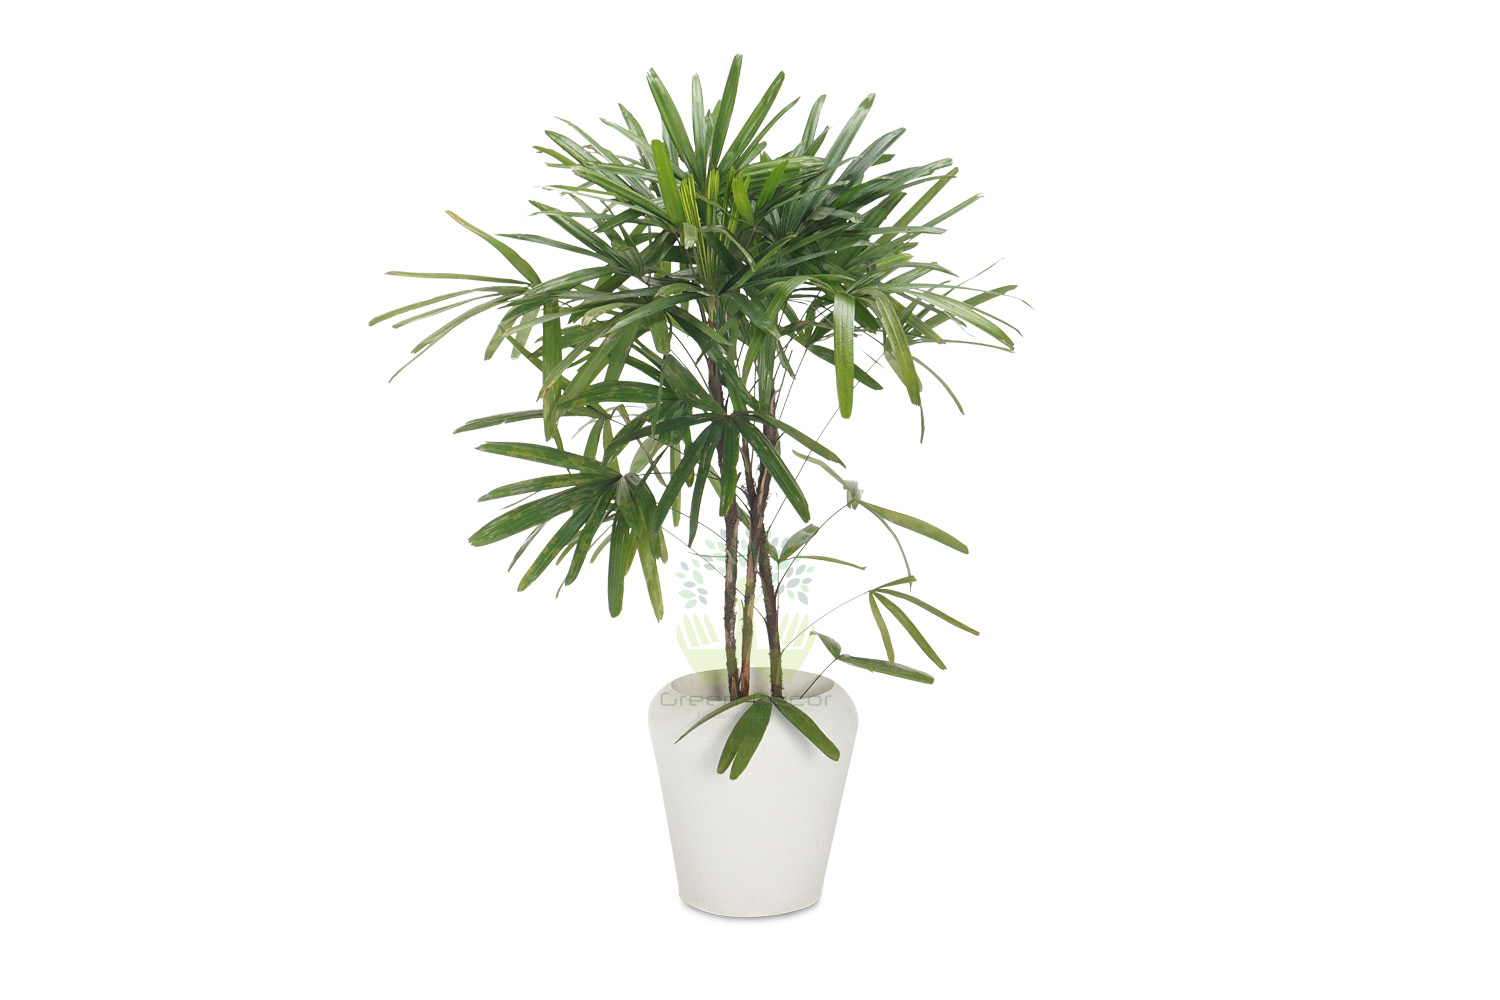 Buy Broadleaf Lady Palm Plants Front View , White Pots and seeds in Delhi NCR by the best online nursery shop Greendecor.